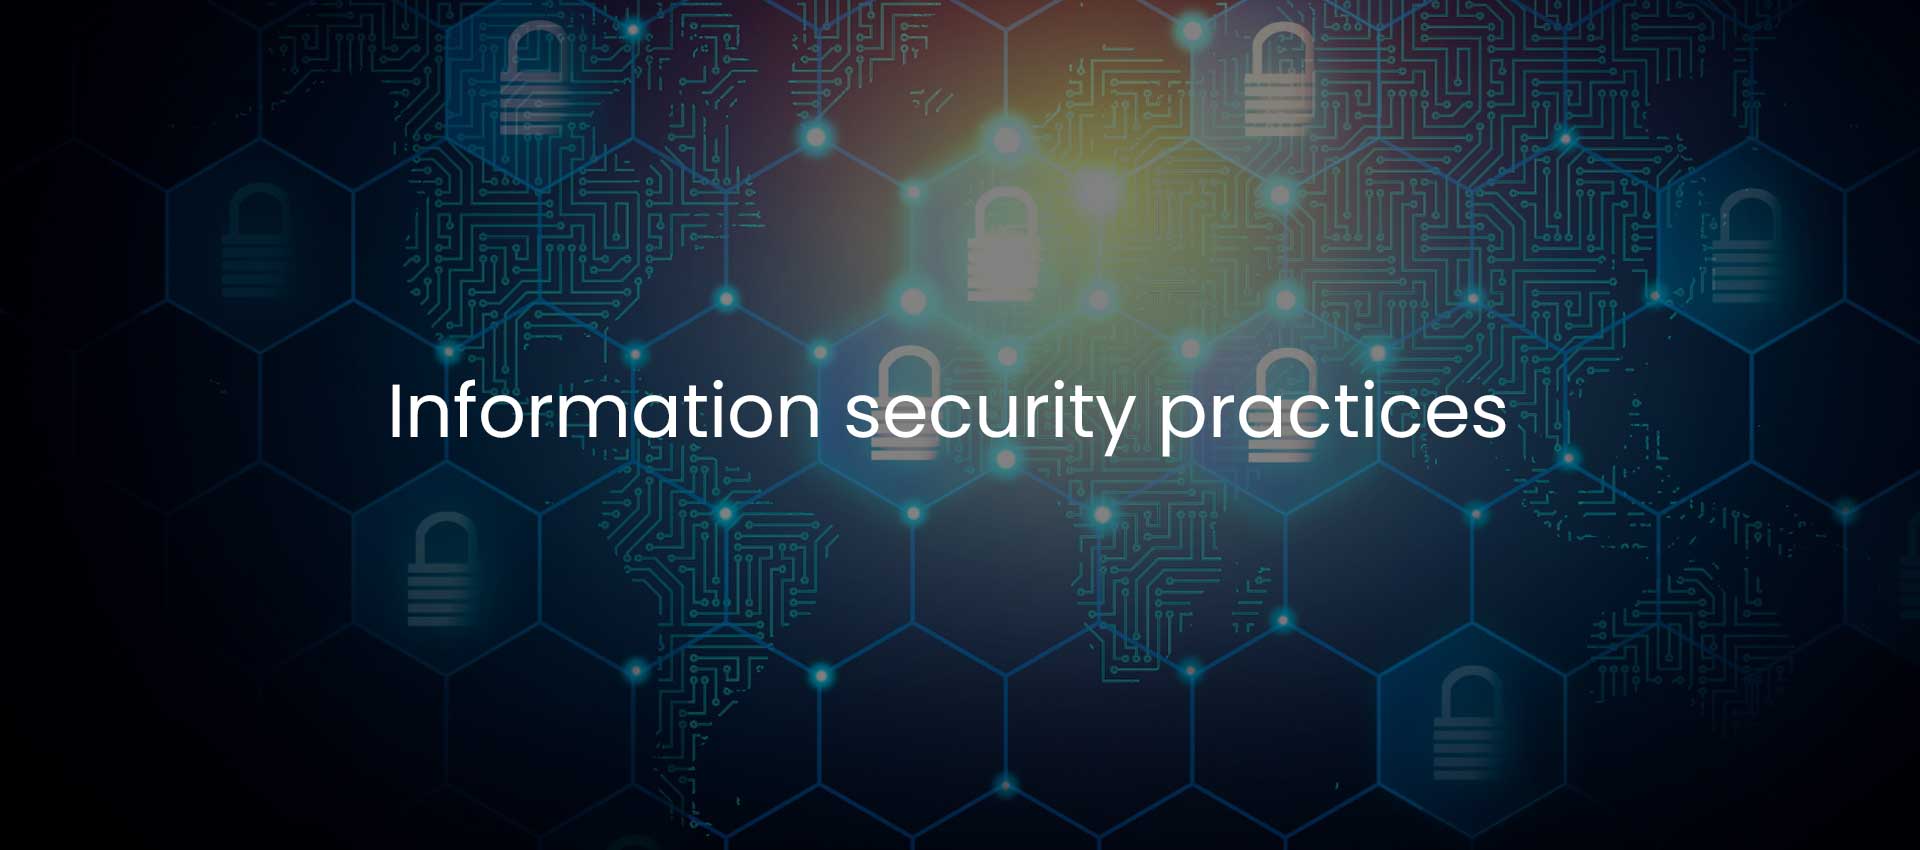 Information-security-practices